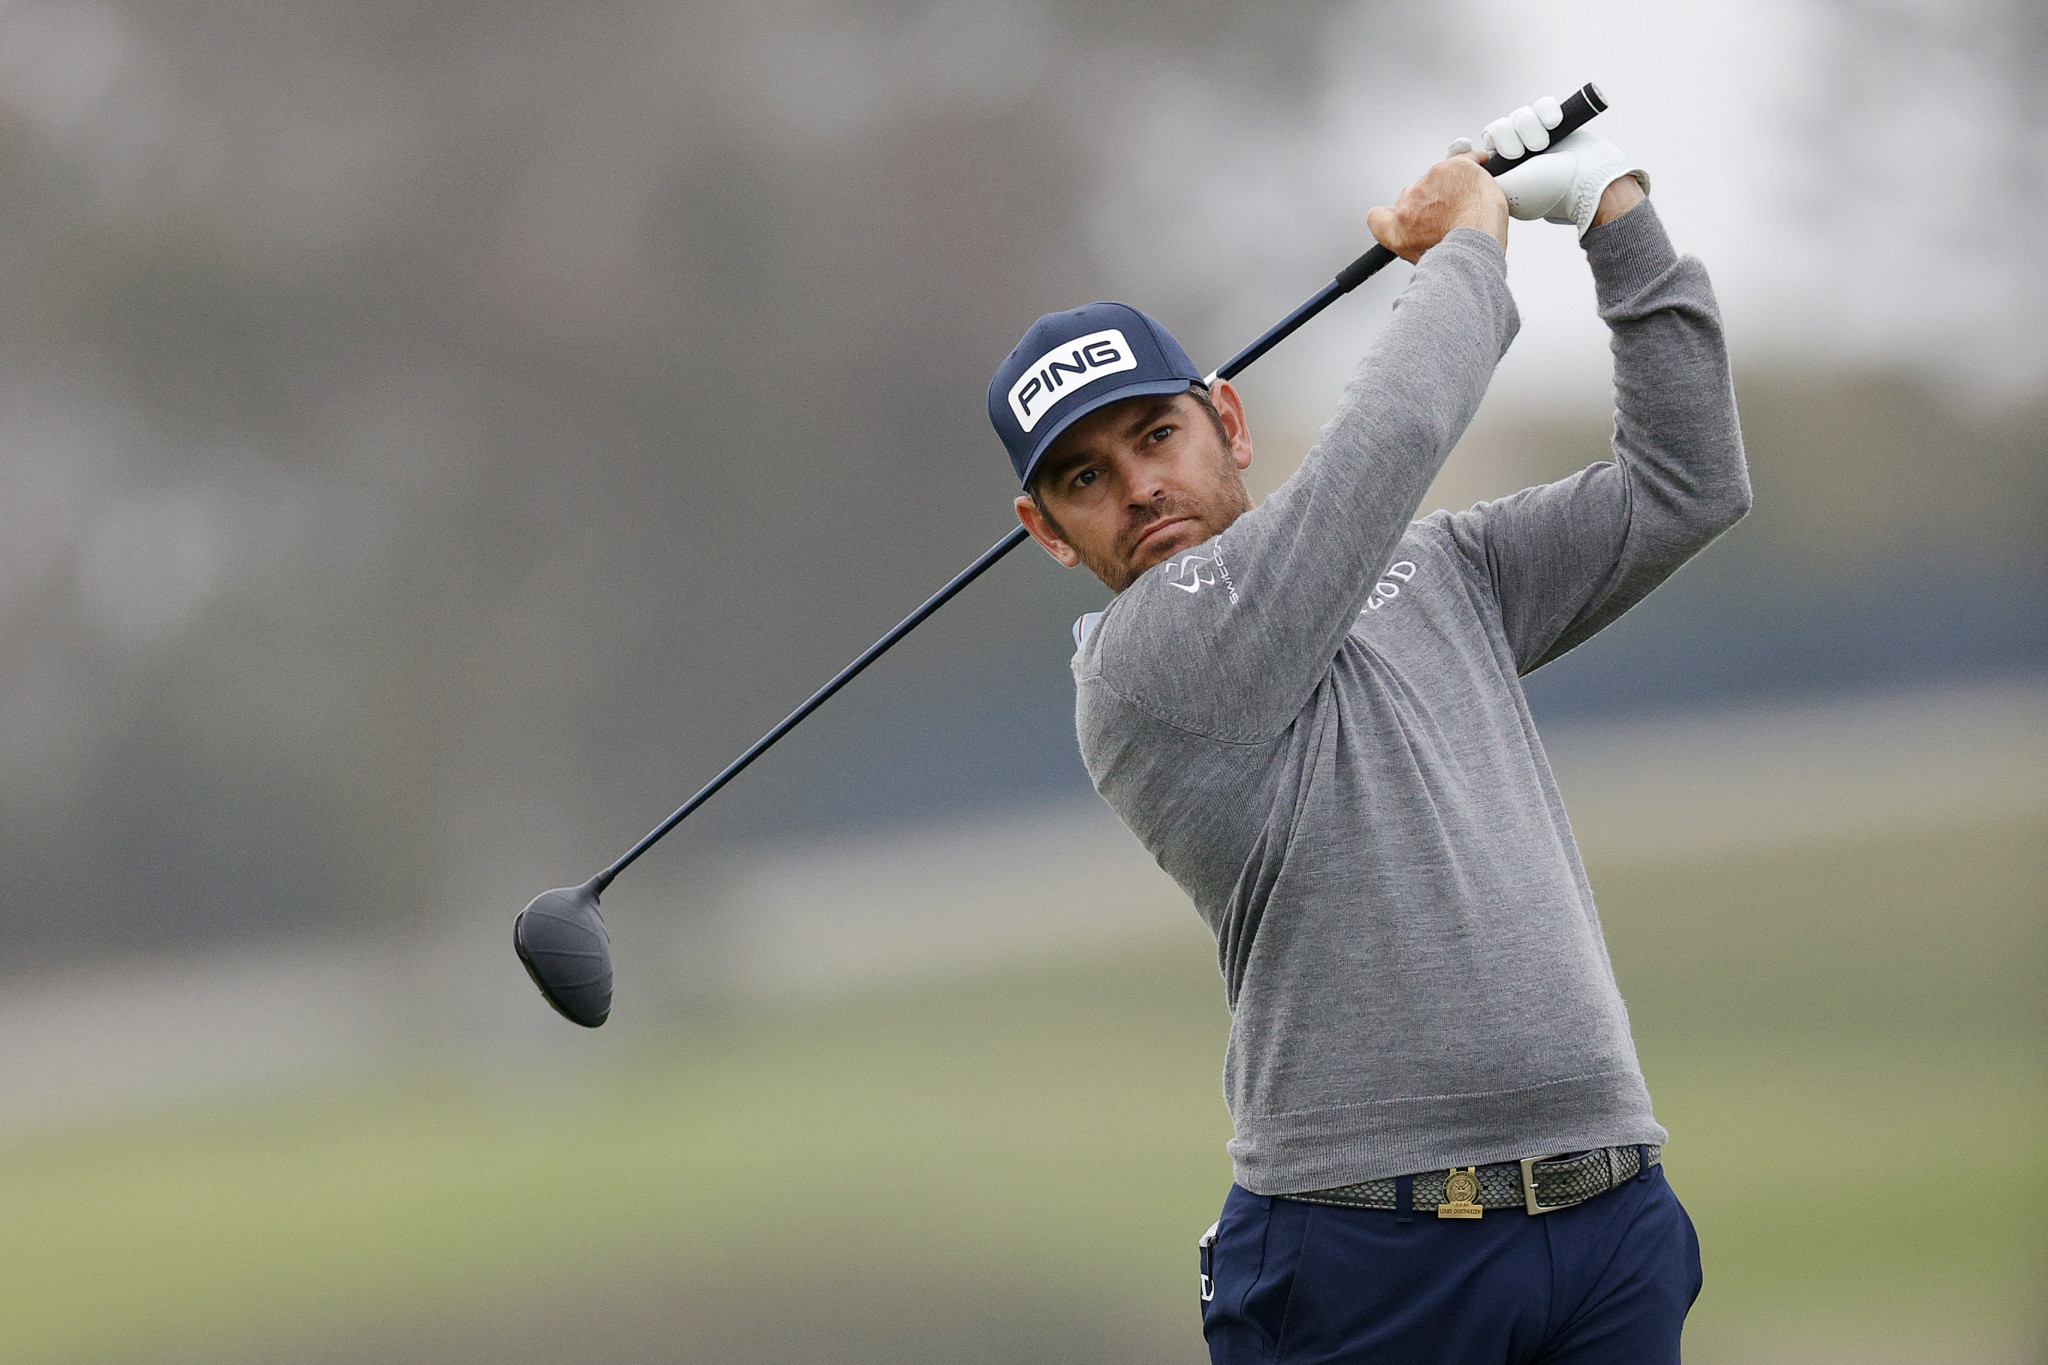 Louis Oosthuizen rattled in three consecutive birdies as he drew level with Russel Henley at the top of the standings on day one of the US Open ©Getty Images